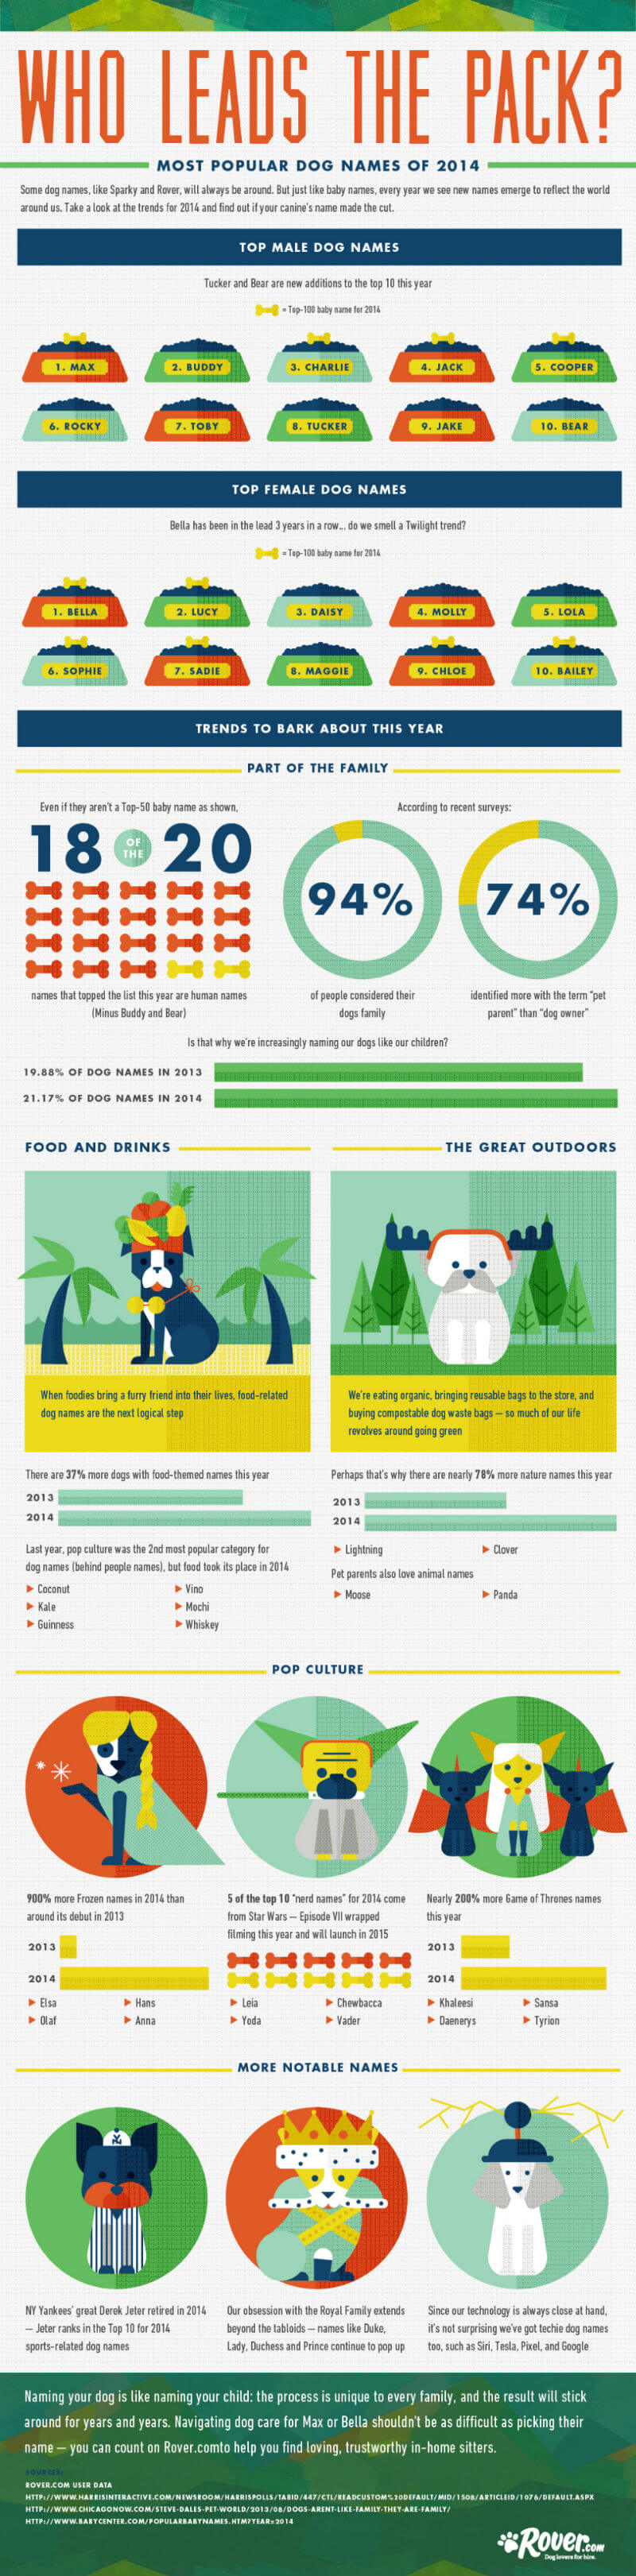 Most popular dog names in 2014 by WWW.ROVER.COM